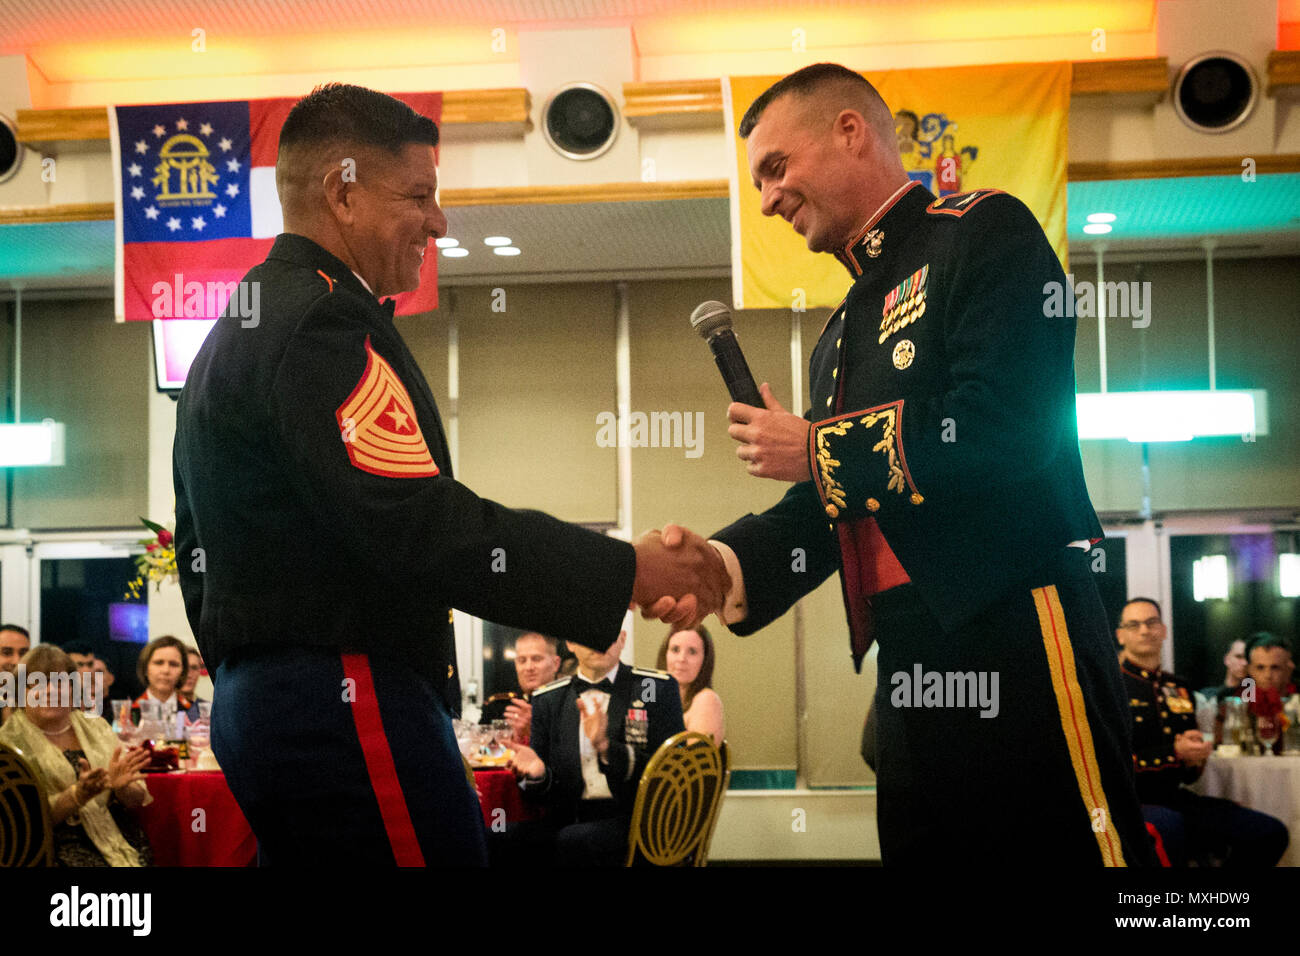 Col. Tye R. Wallace, commander of the 31st Marine Expeditionary Unit, welcomes retired Sgt. Maj. Gonzalo A. “Butch” Vasquez, the guest of honor for the Marine Corps Birthday Ball ceremony at Camp Hansen, Okinawa, Japan, Nov. 11, 2016. The Marines were celebrating the 241st birthday of the U.S. Marine Corps. (U.S. Marine Corps photo by Lance Cpl. Amy Phan, 31st Marine Expeditionary Unit/Released) Stock Photo